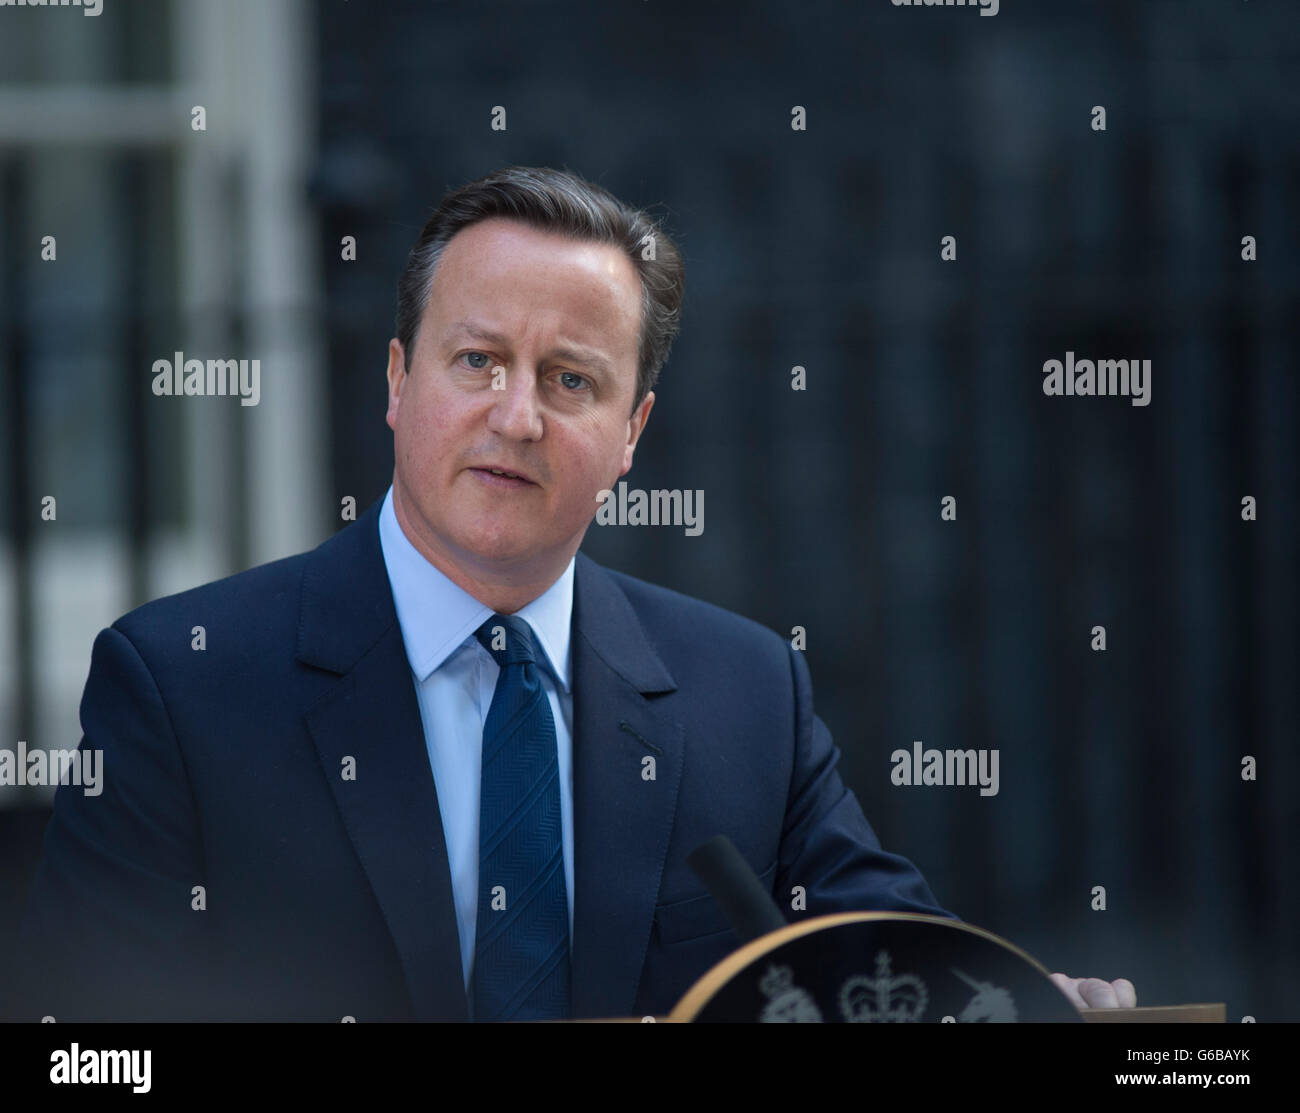 Downing Street, London, UK. 24th June 2016. PM David Cameron announces his decision to step down from leadership before October 2016 in light of EU Referendum outcome. Credit:  Malcolm Park editorial/Alamy Live News. Stock Photo